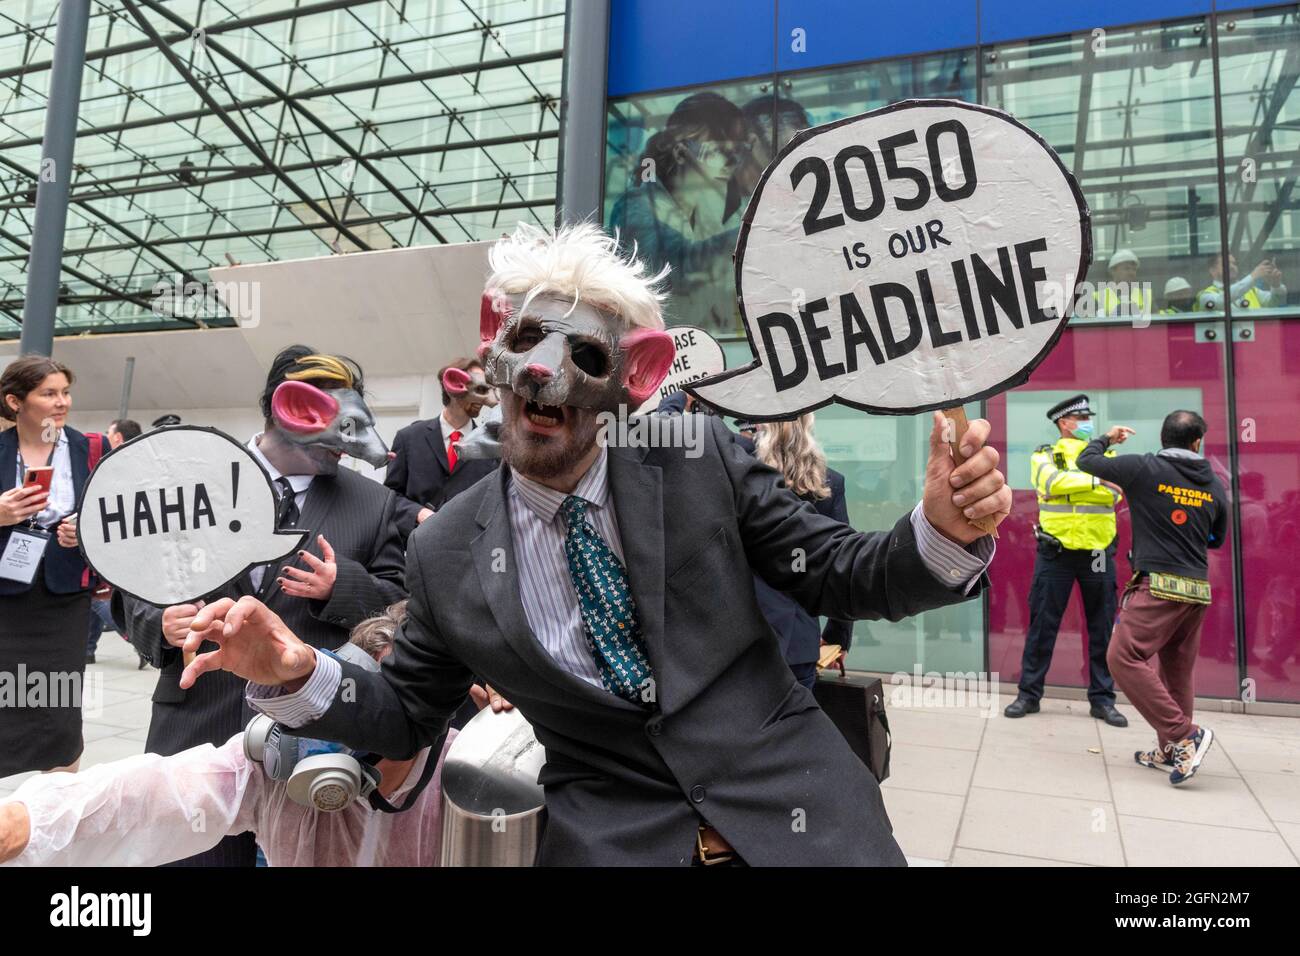 A protester in a mask outside the Department for Business Energy and Industrial Strategy during Extinction Rebellion's Impossible Rebellion protest continues march to the Department for Business Energy and Industrial Strategy under the banner of Stop The Harm protesting against climate change, global warming, and plans to target the root cause of the climate and ecological crisis and to demand the government divest from fossil fuel companies. (Photo by Dave Rushen / SOPA Images/Sipa USA) Stock Photo